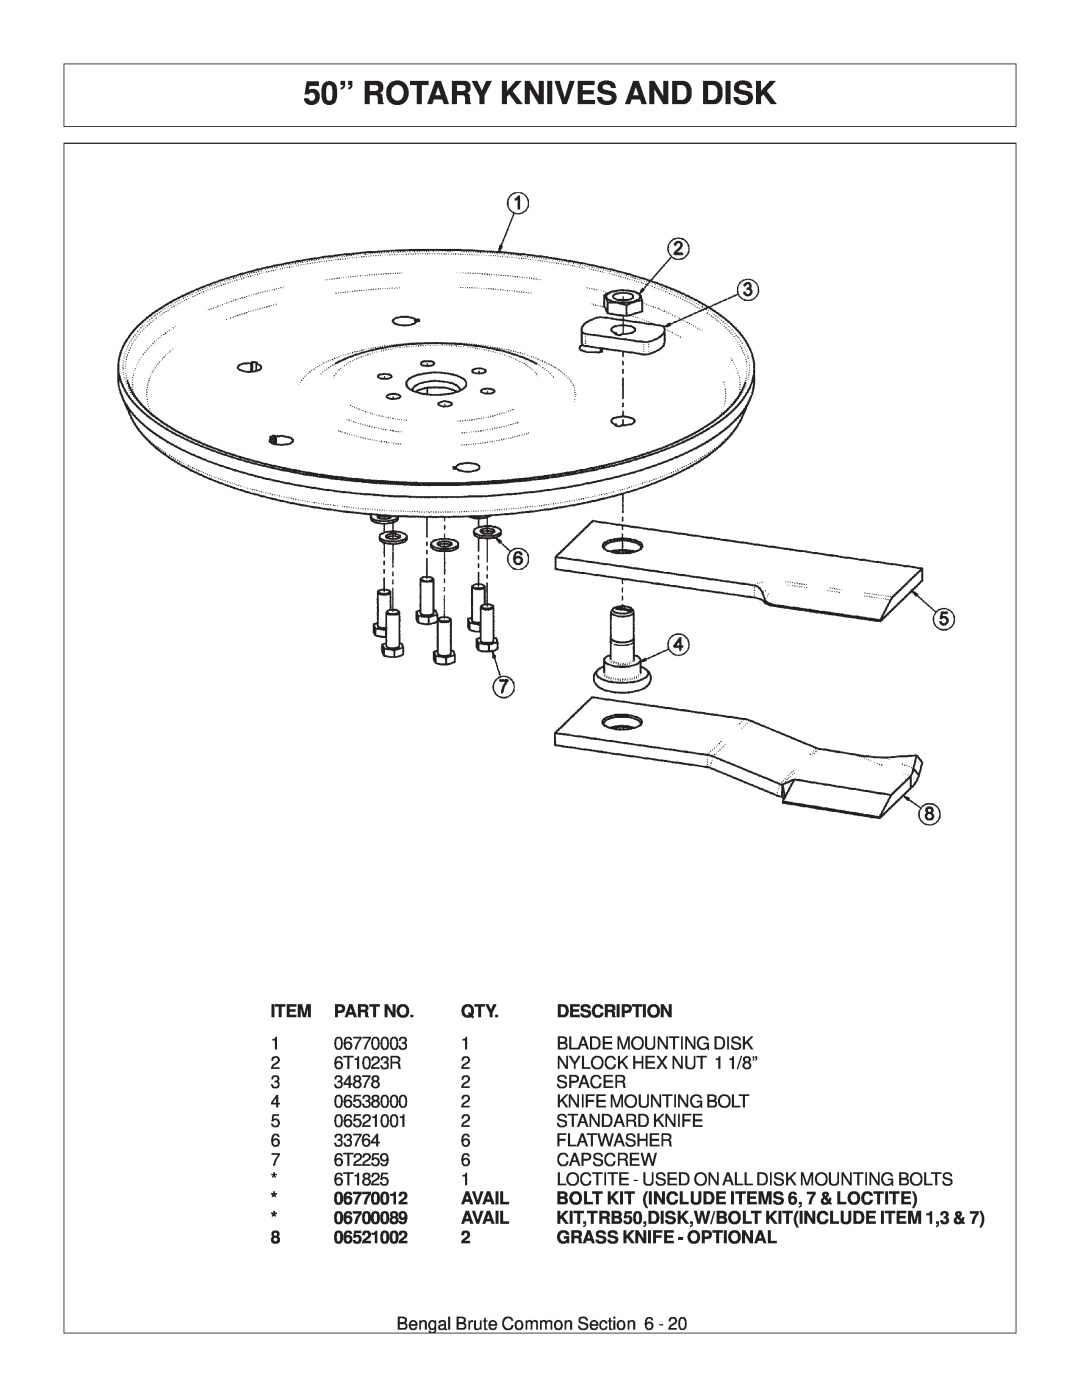 Tiger JD 62-6420 50” ROTARY KNIVES AND DISK, Description, 06770012, Avail, BOLT KIT INCLUDE ITEMS 6, 7 & LOCTITE, 06700089 